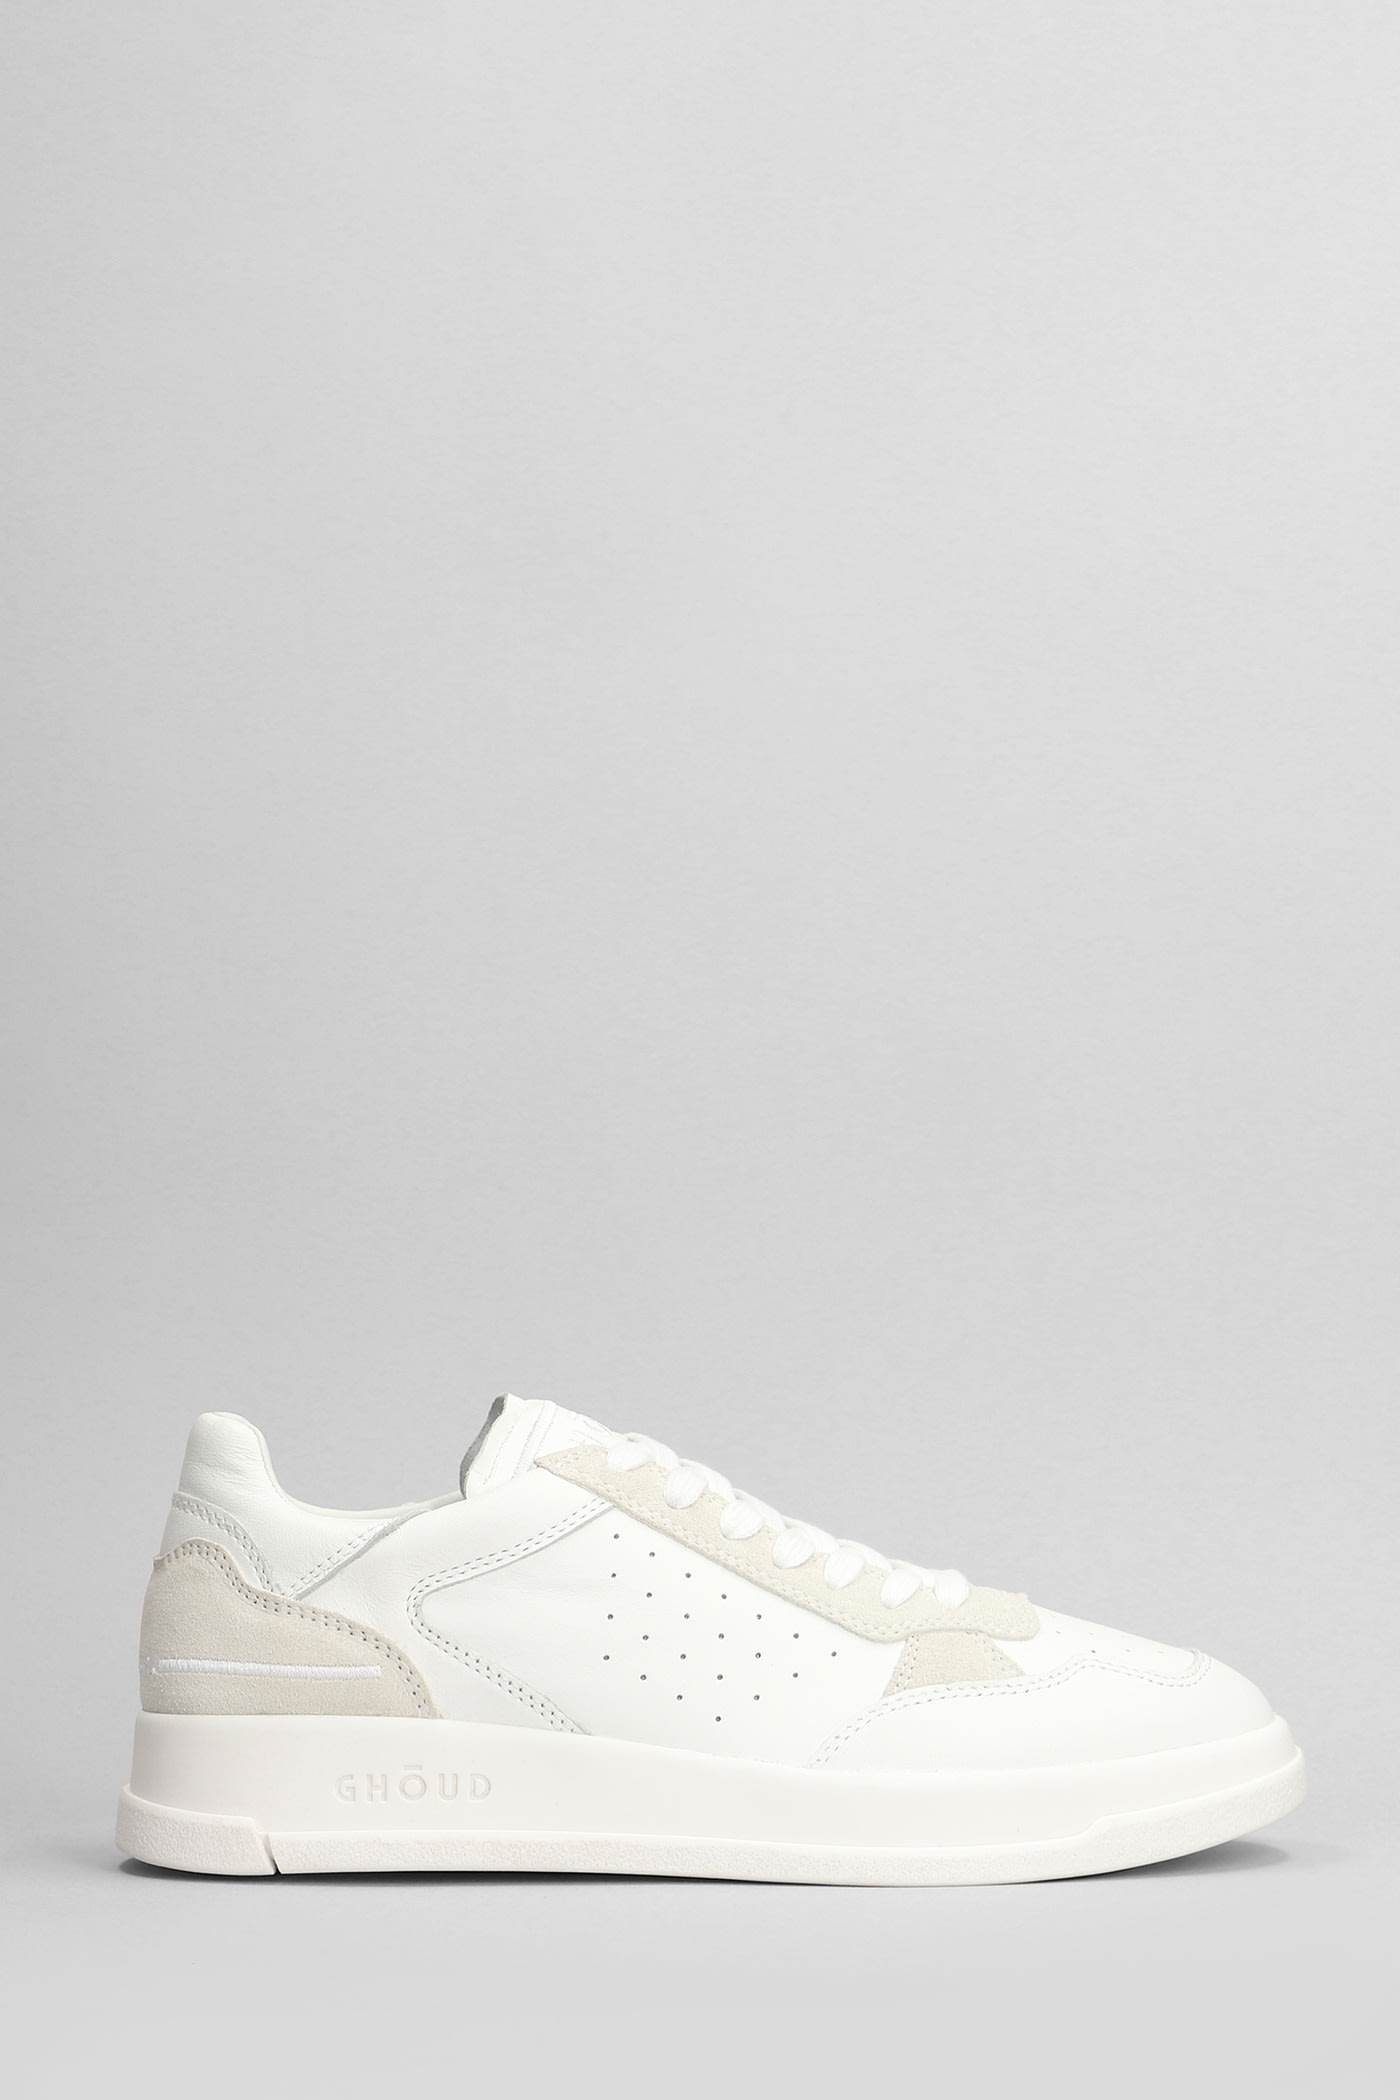 Tweener Low Sneakers In White Suede And Leather